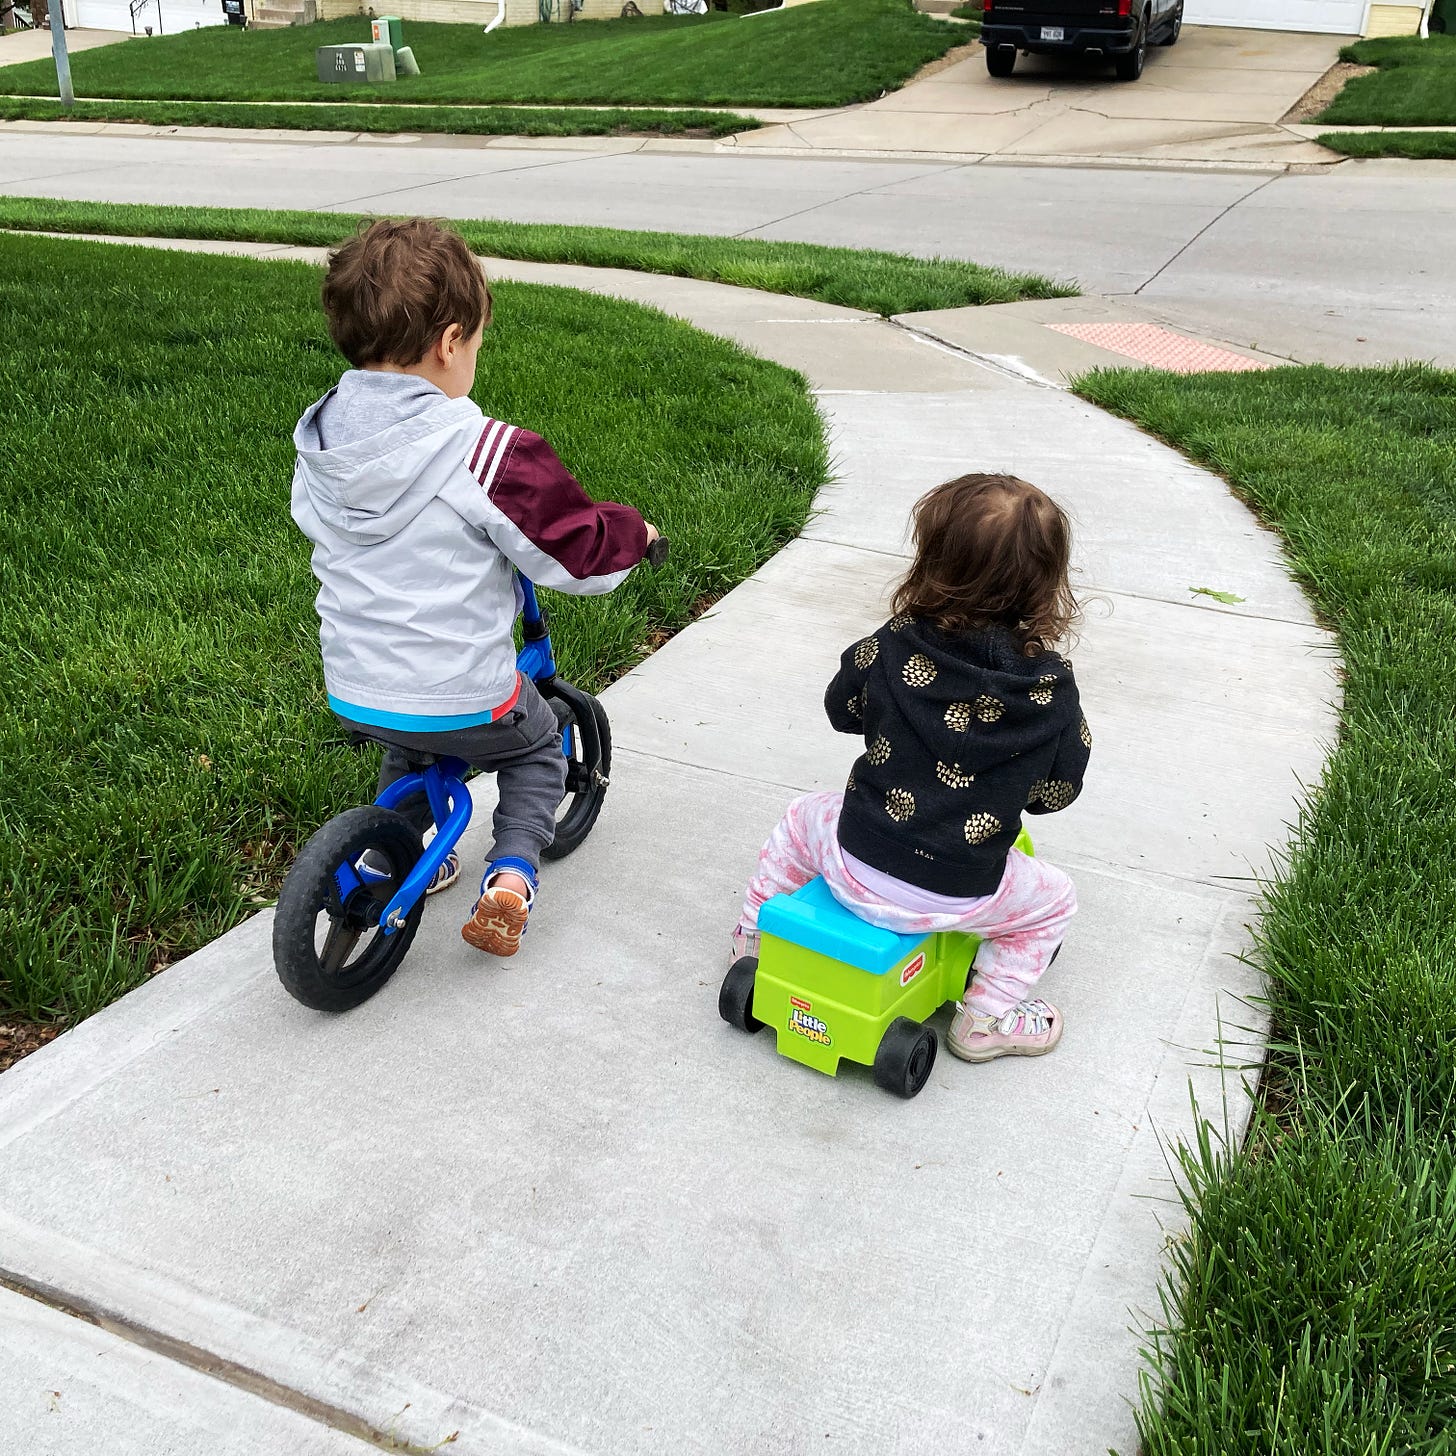 The picture shows two children on a sidewalk between areas of green grass. The three year old boy is on a balance bike and the two year old girl is on a ride-on toy train. They are facing away from the camera.